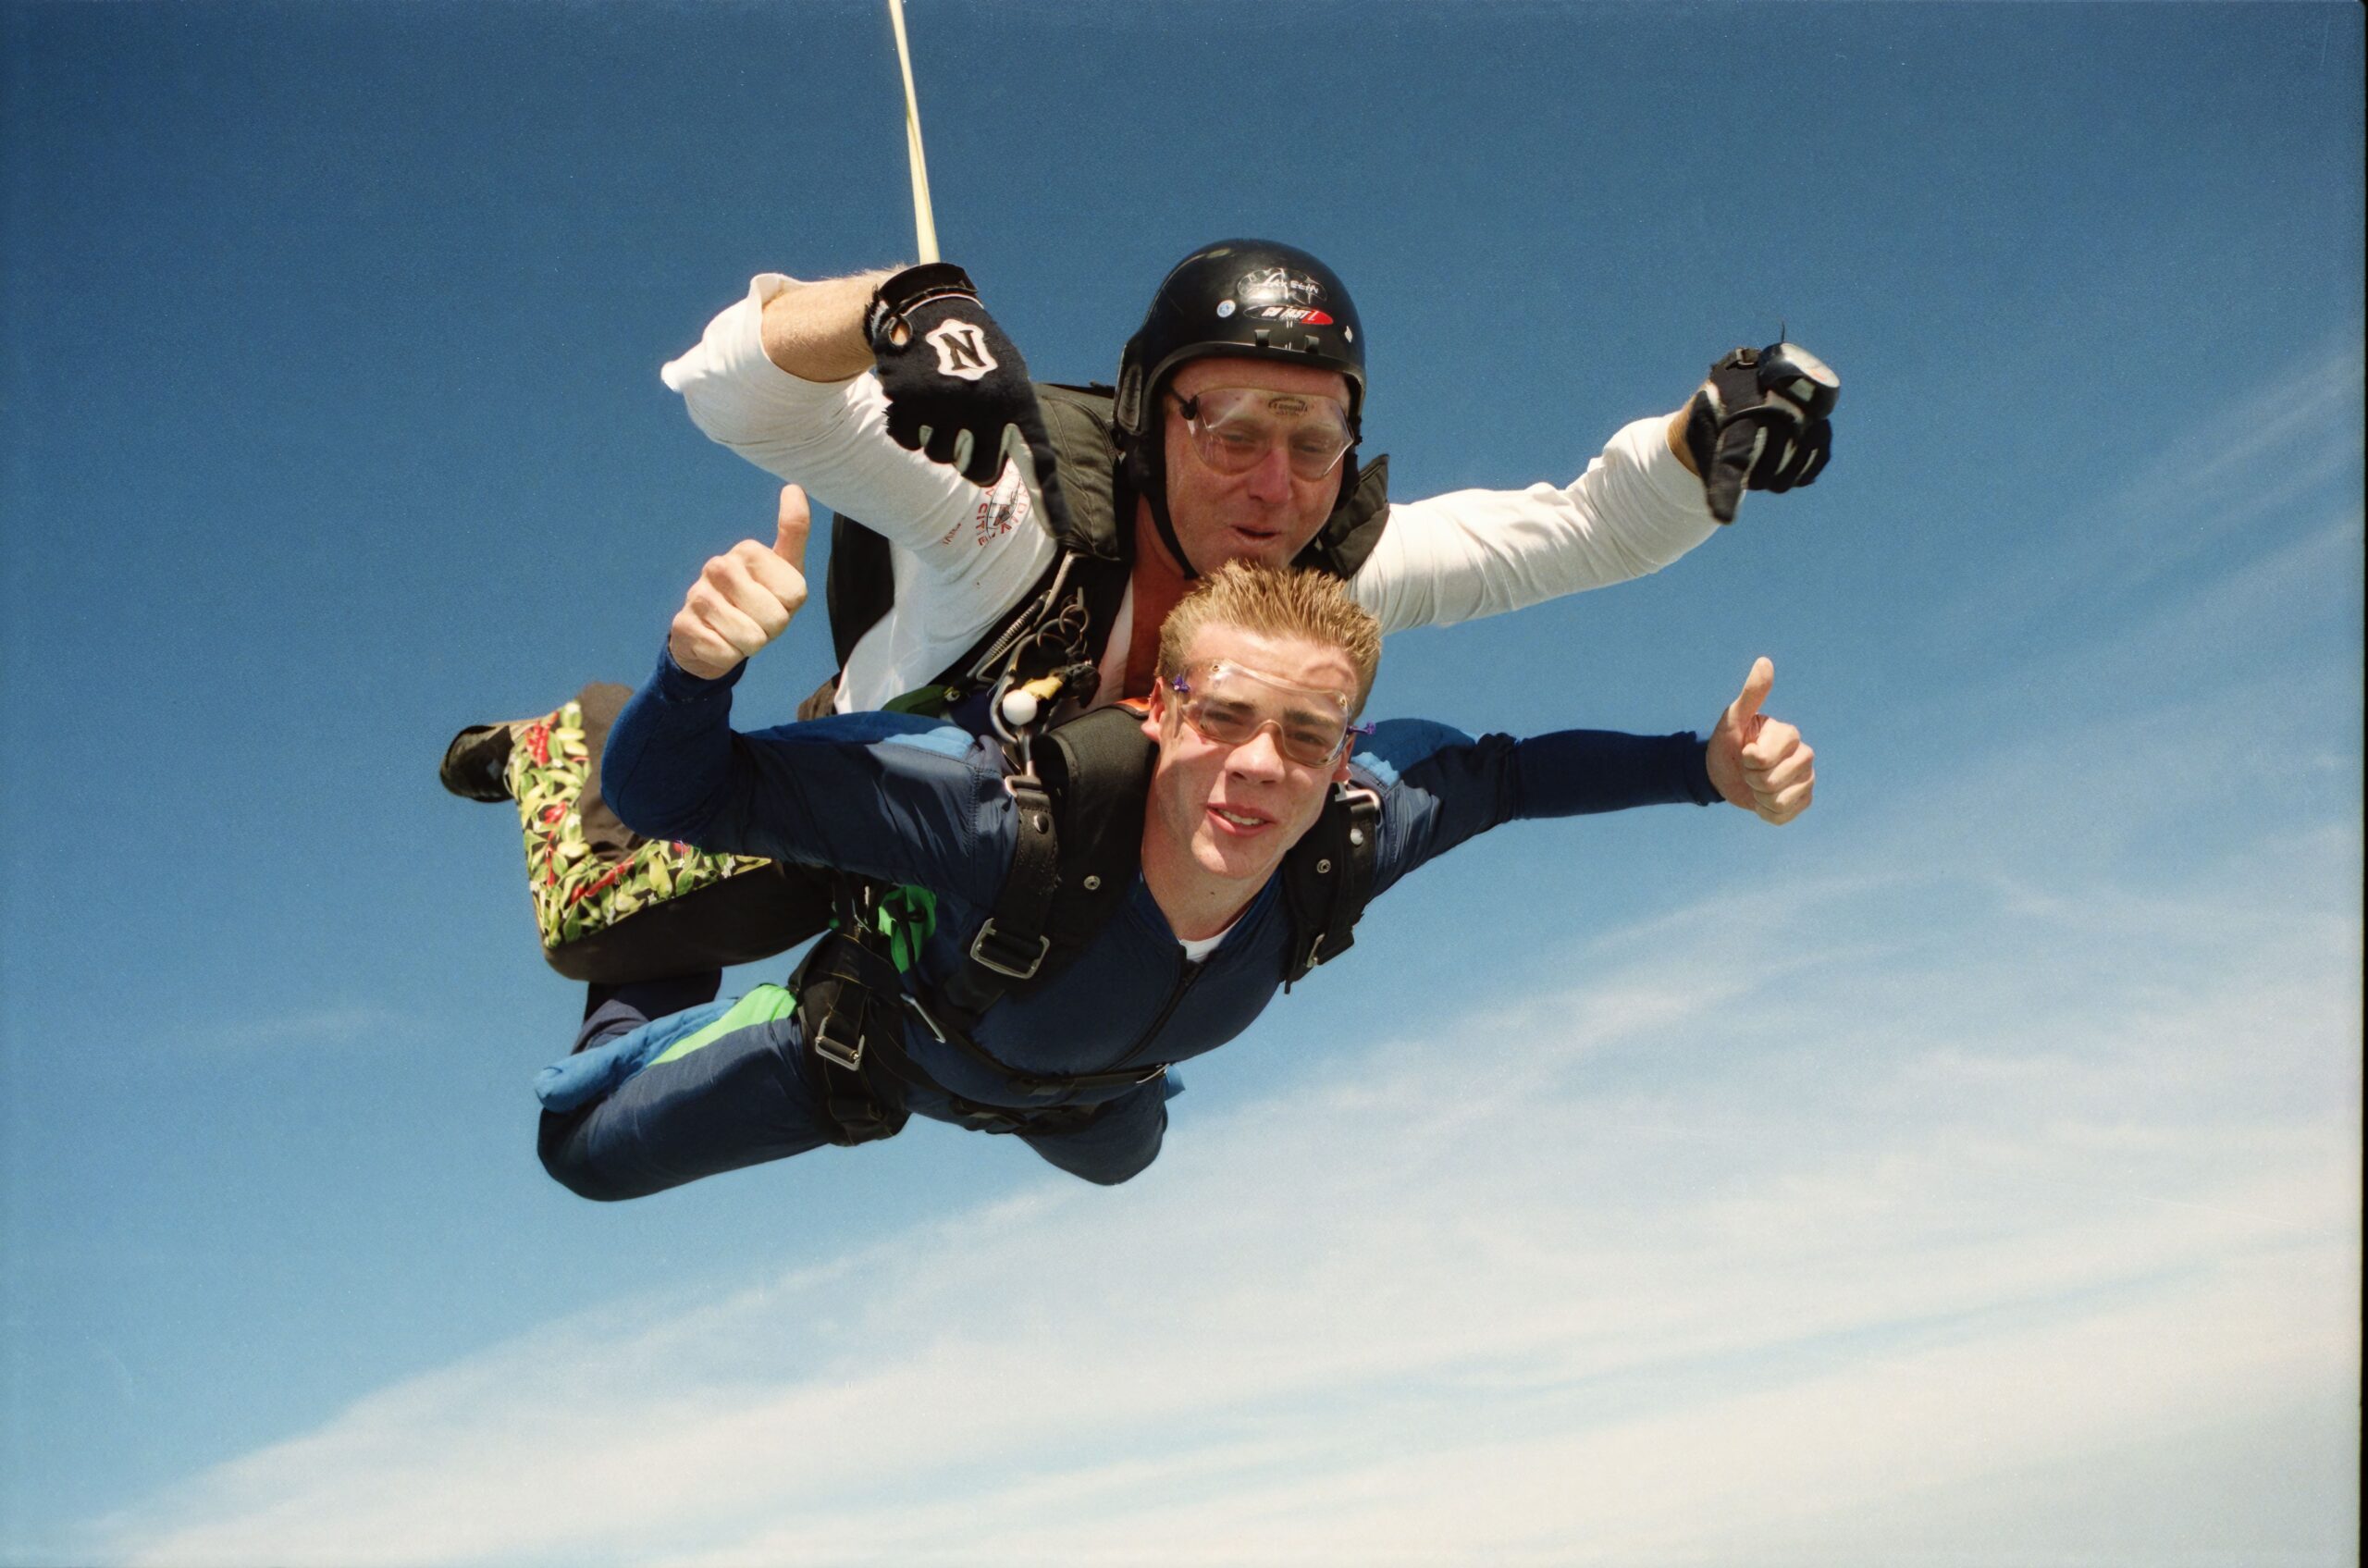 Skydiving vs. Bungee Jumping Which is Scarier?